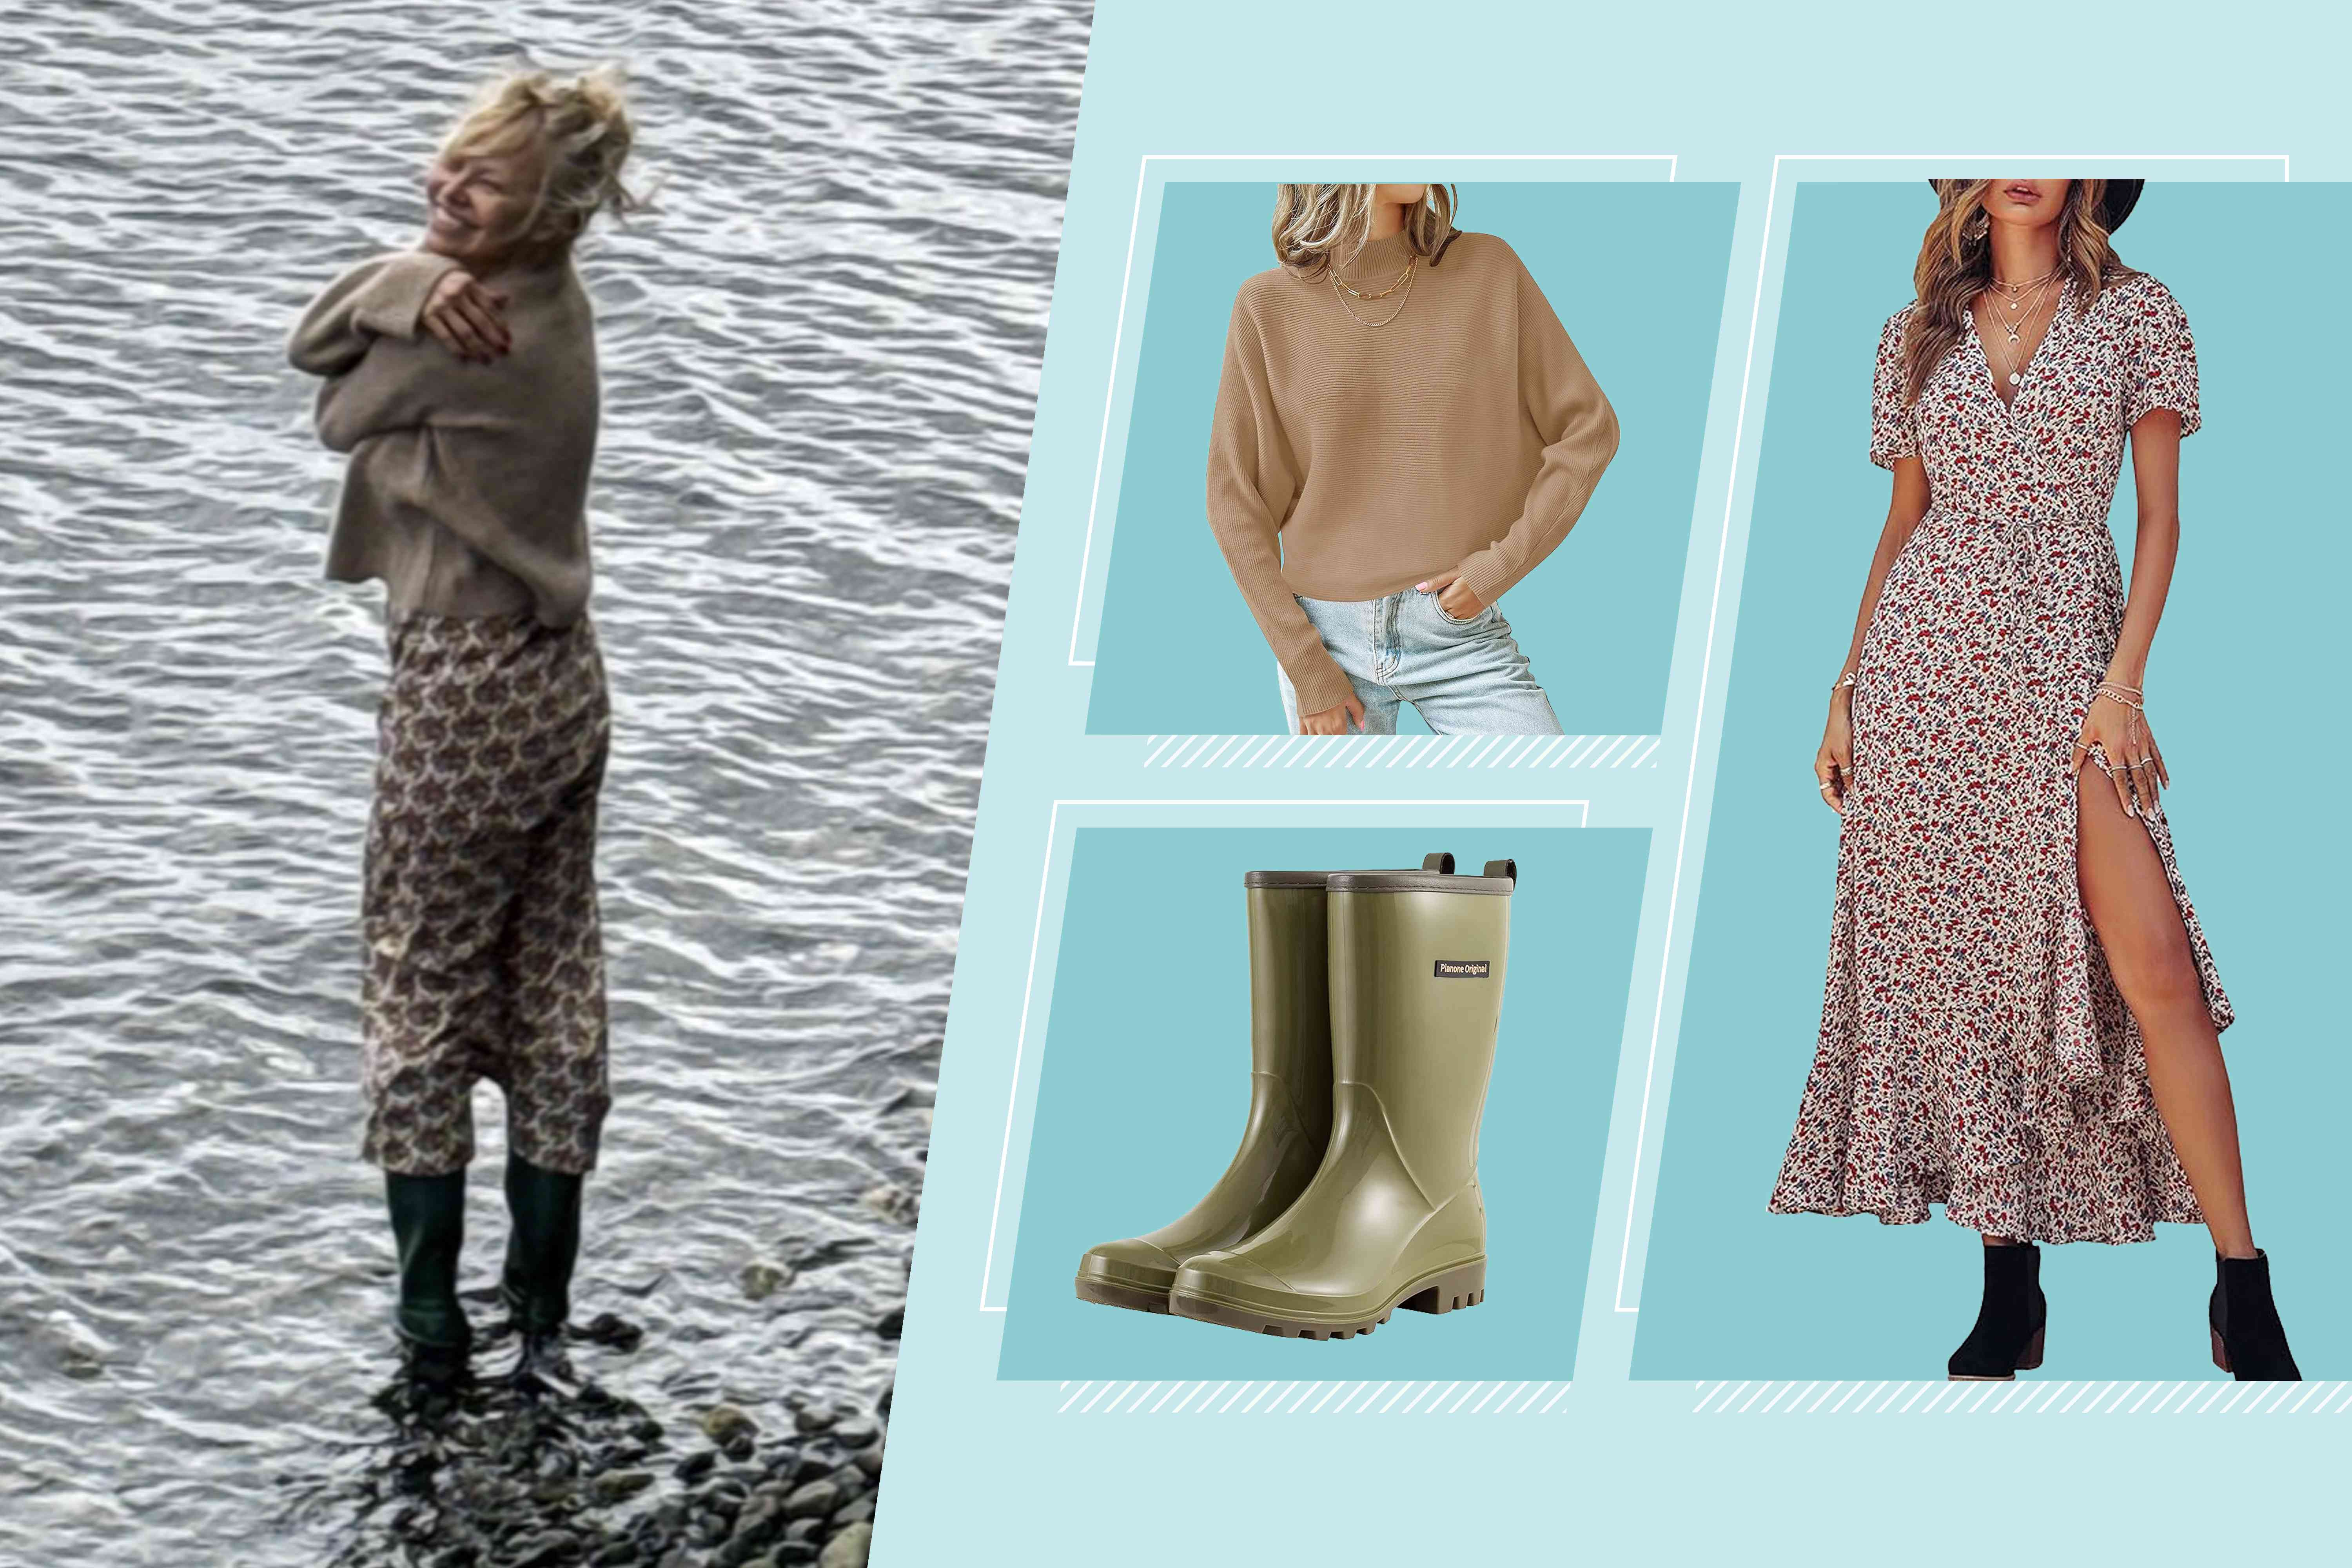 Pamela Anderson’s Floral Dress and Rain Boots Are What You’ll Want to Wear for Spring Chores — Get the Look from $10